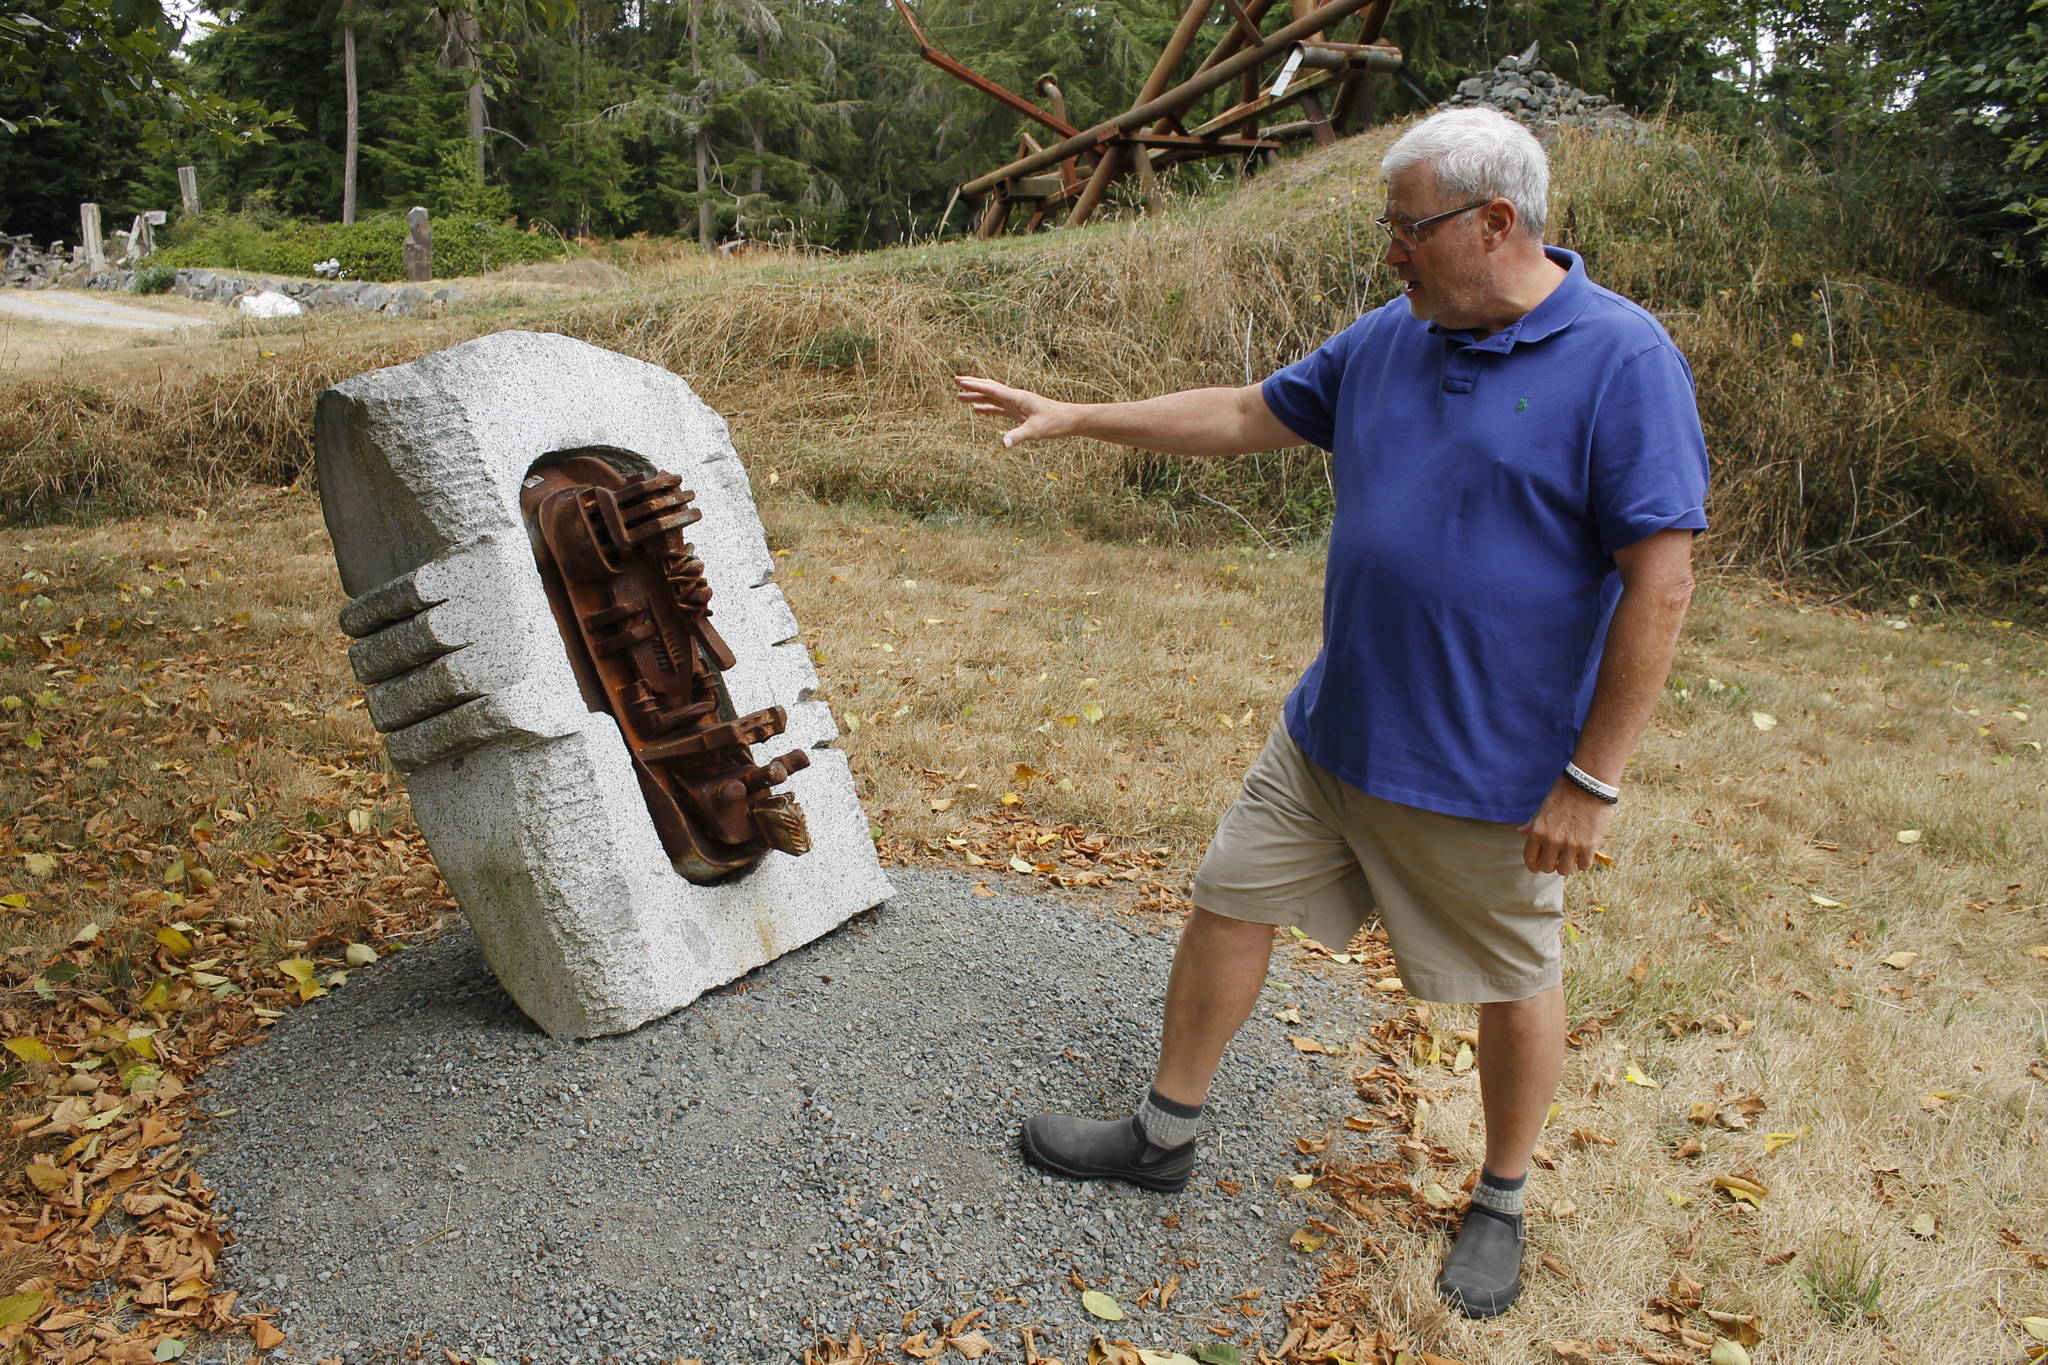 Burt Beusch, executive director of the Cloudstone Foundation, points out one of many sculptures in the Cloudstone Sculpture Park. (Photo by Kira Erickson/South Whidbey Record)